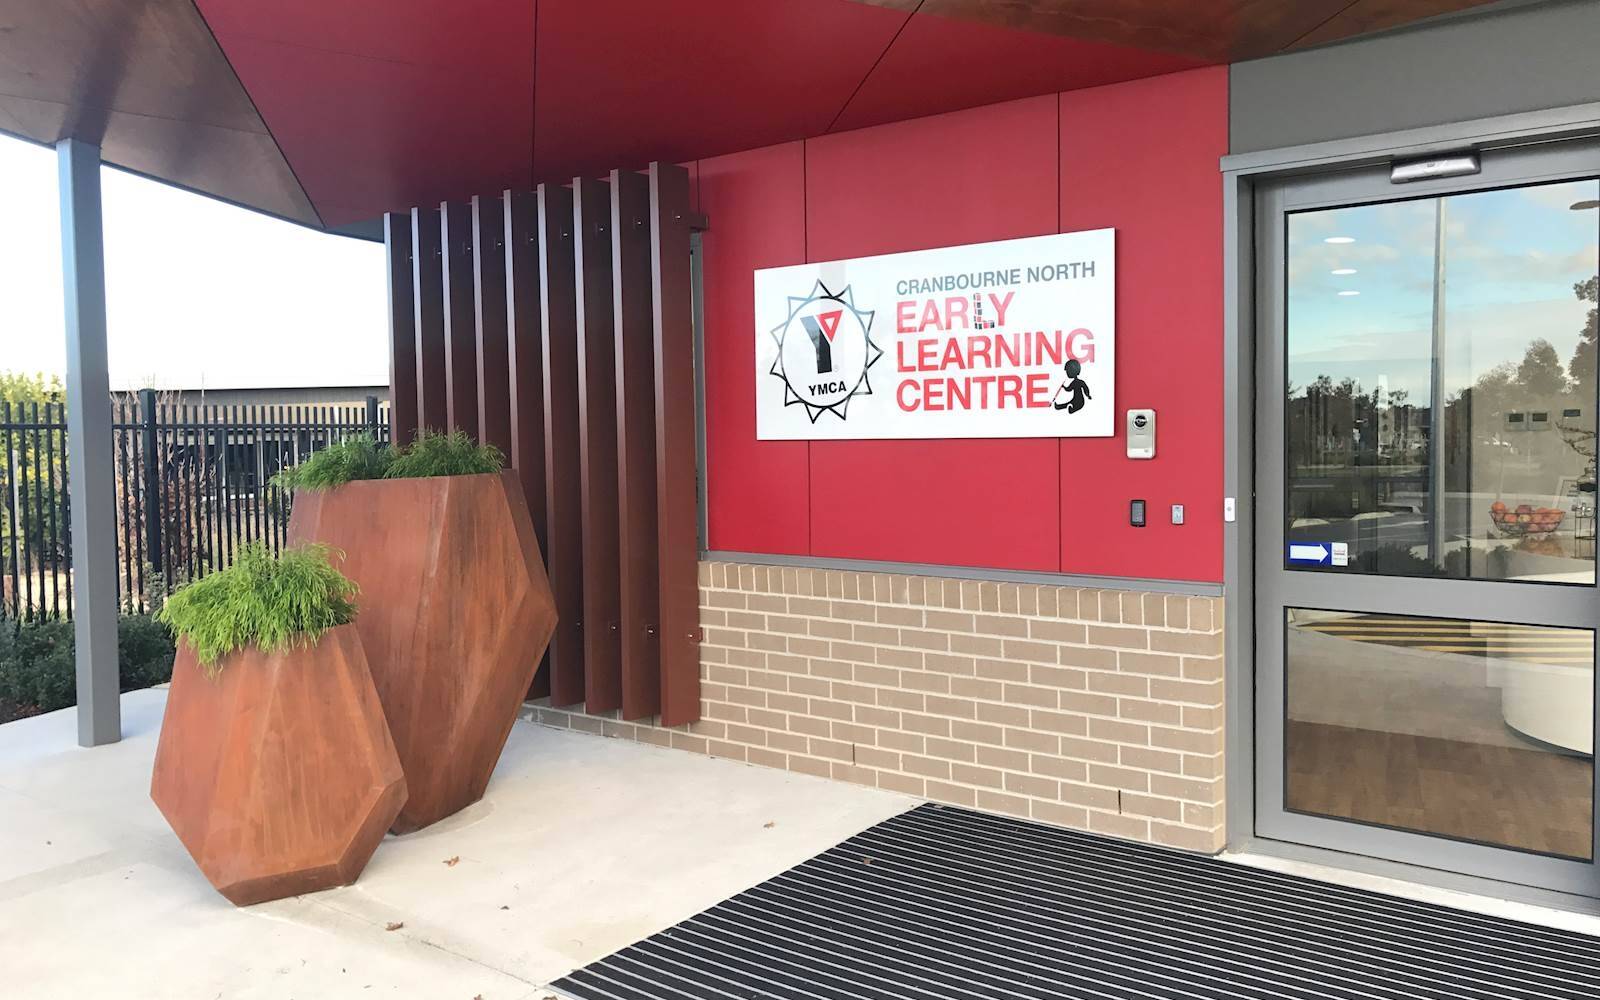 Cranbourne North YMCA Early Learning Centre